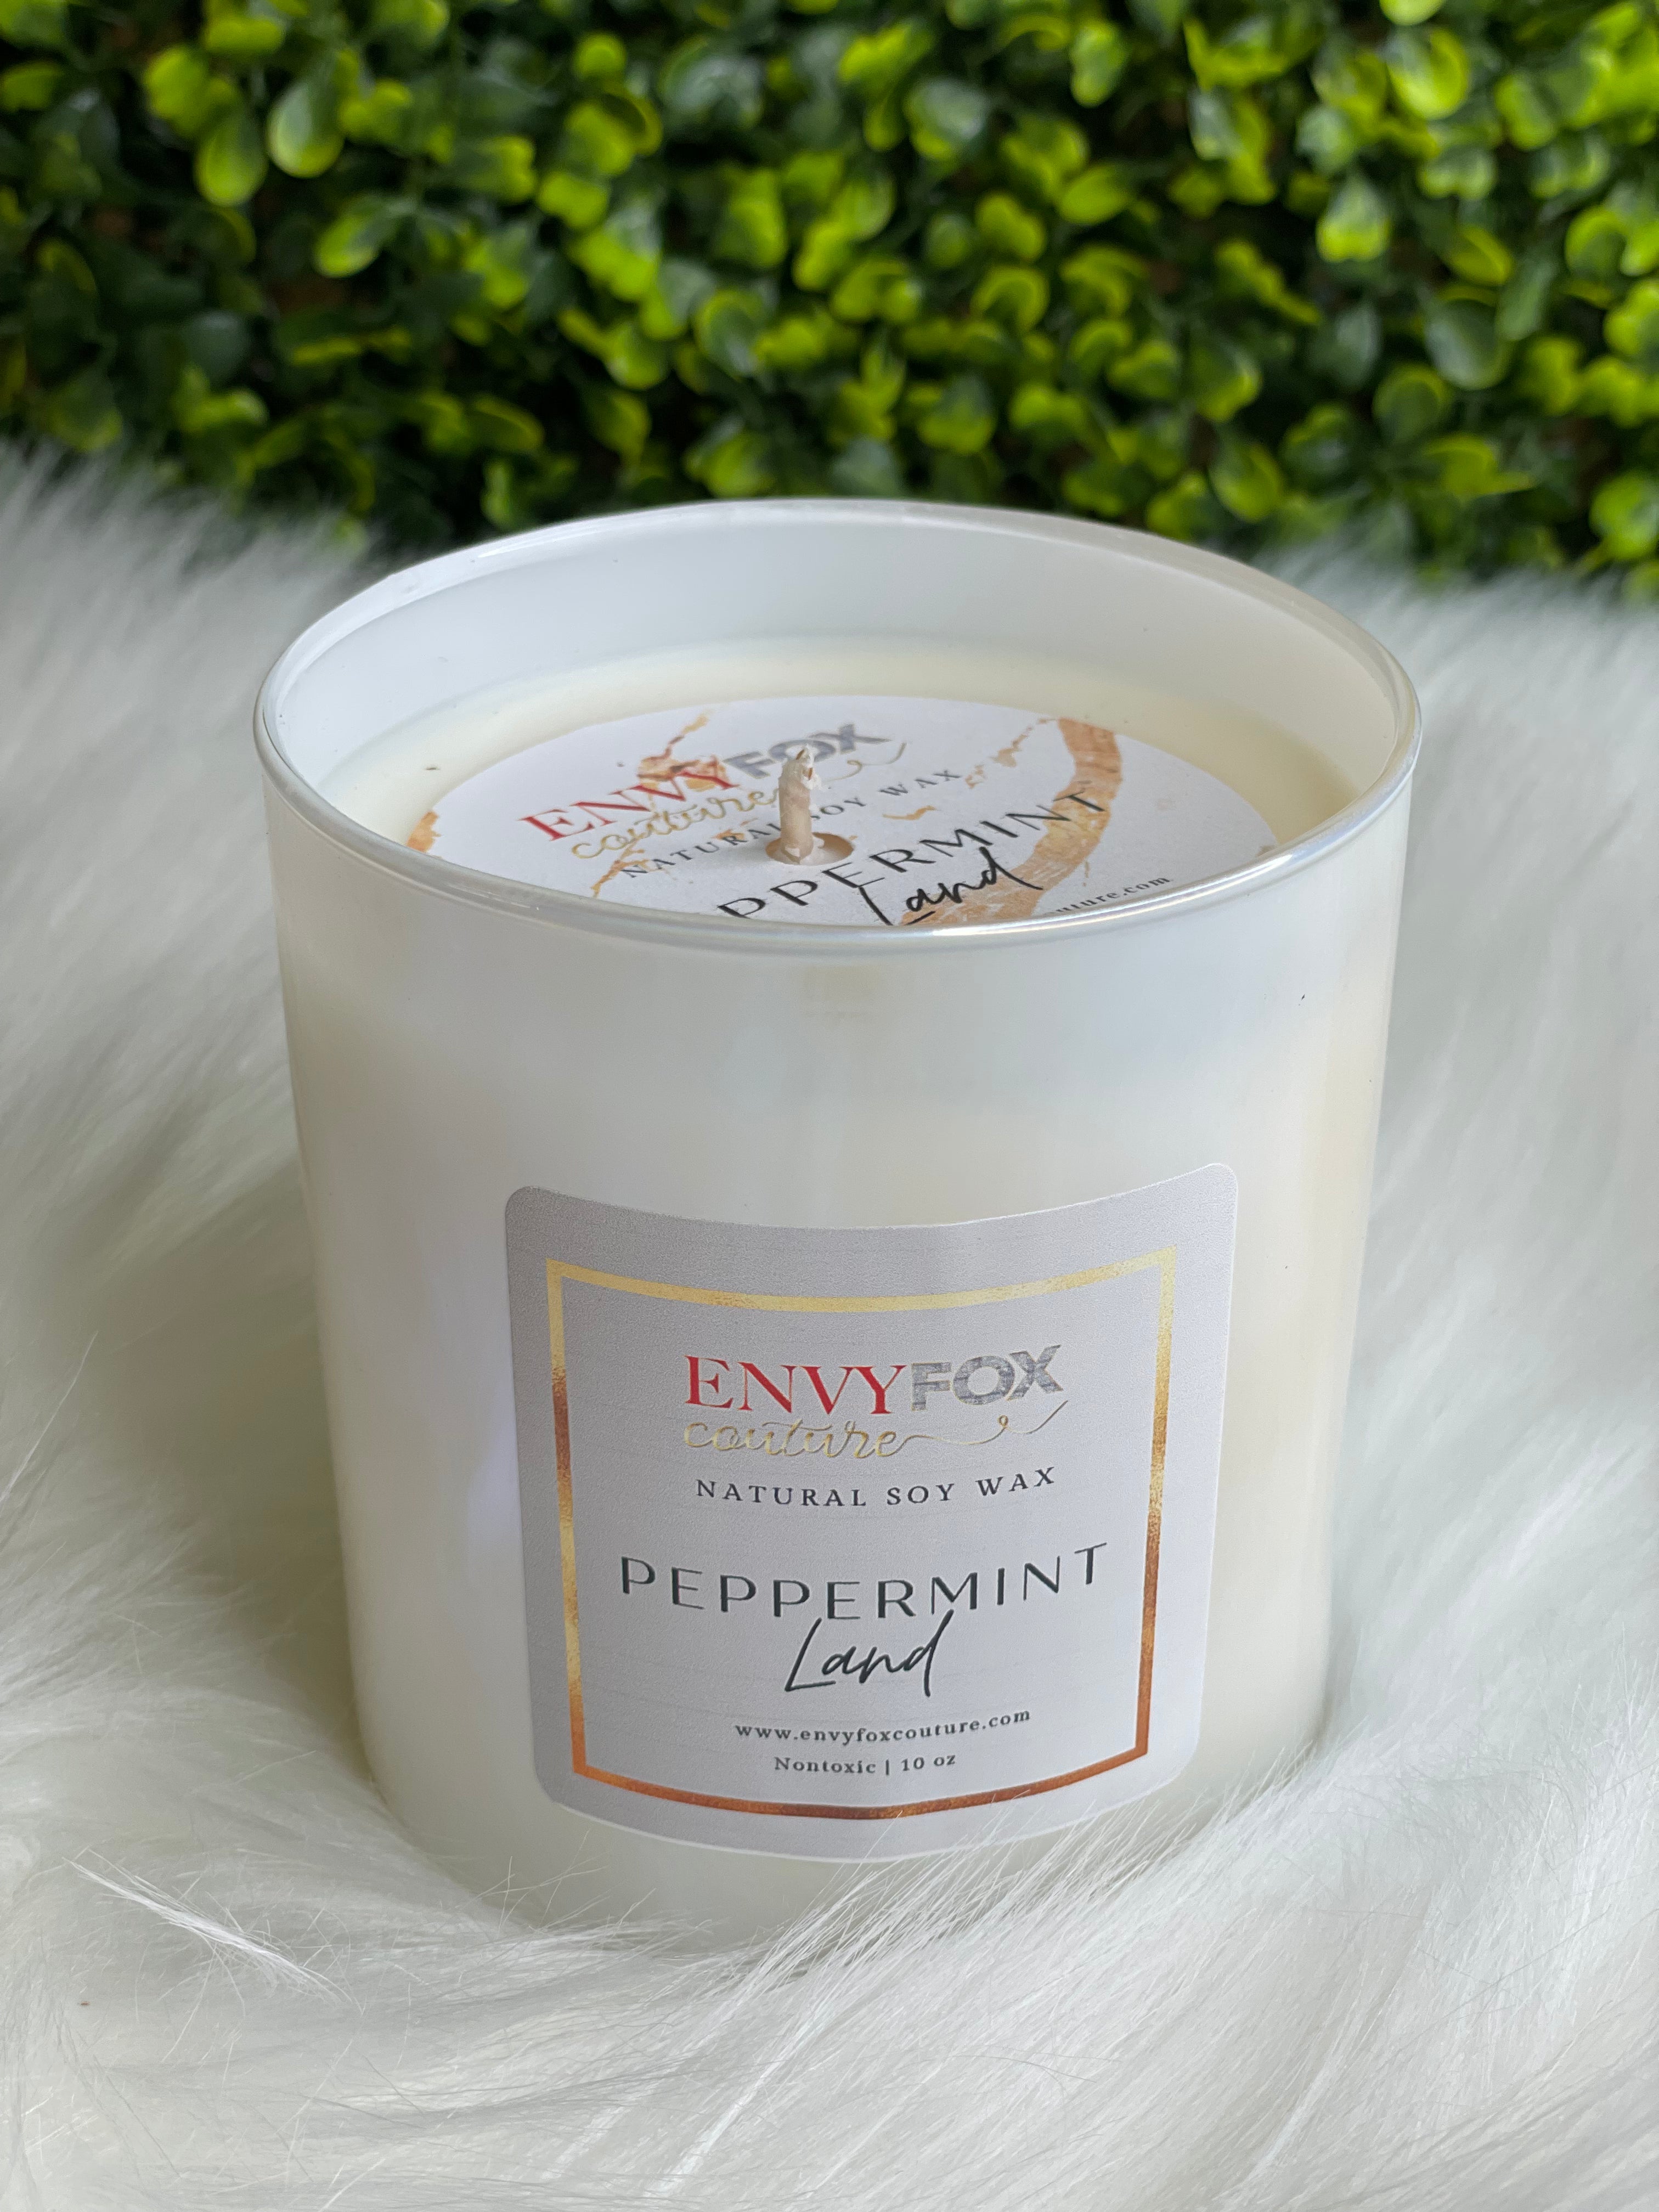 Peppermint Land 10 oz Natural Soy Wax Candle